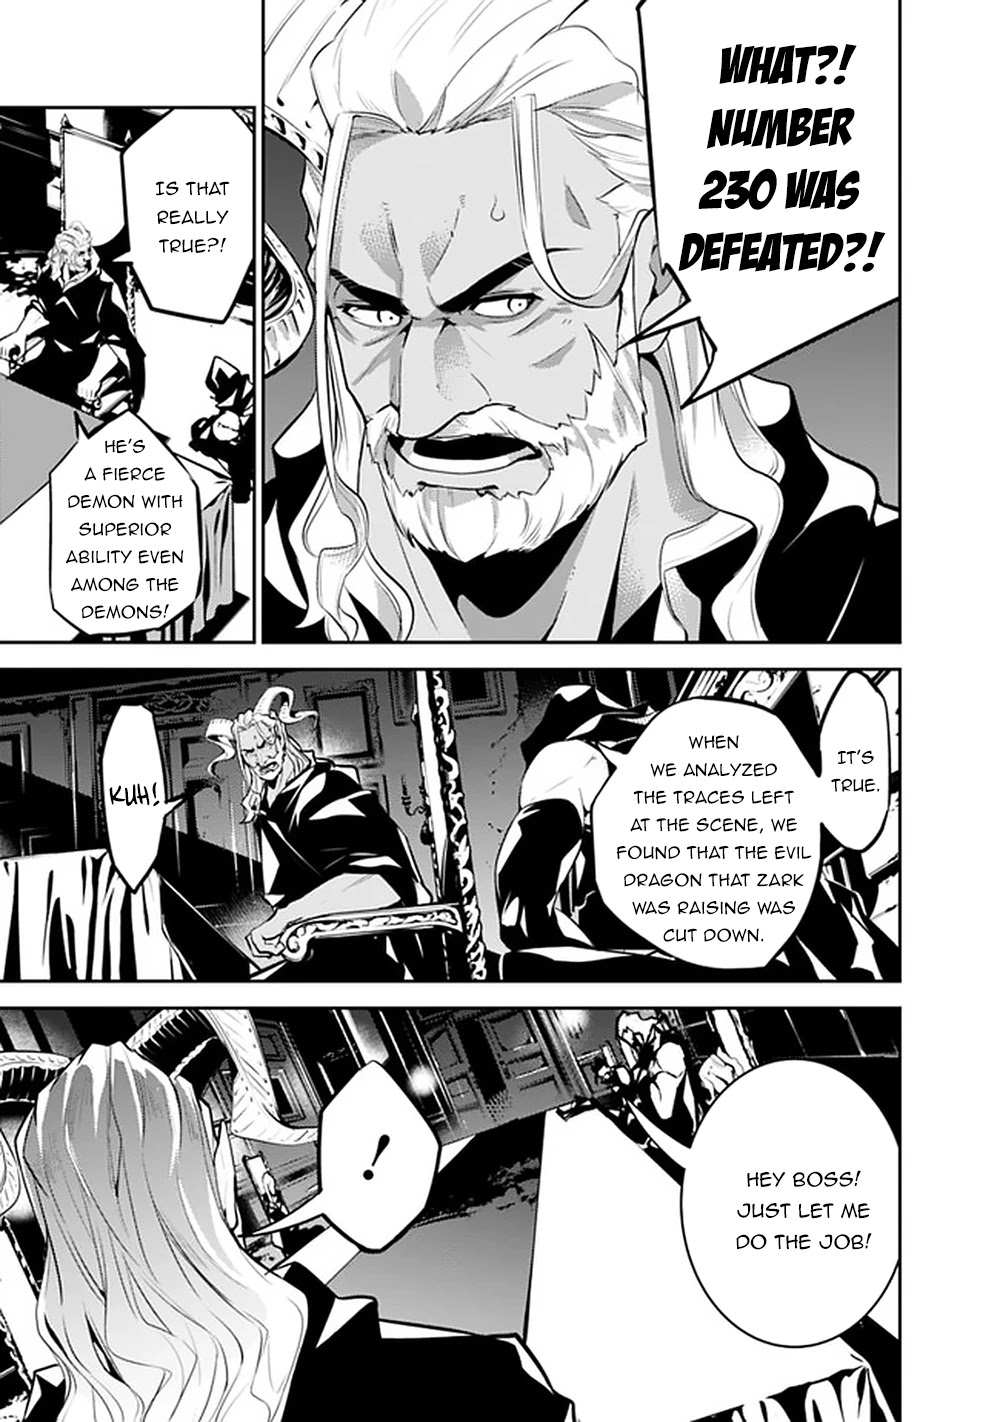 The Strongest Magical Swordsman Ever Reborn As An F-Rank Adventurer. - Page 4